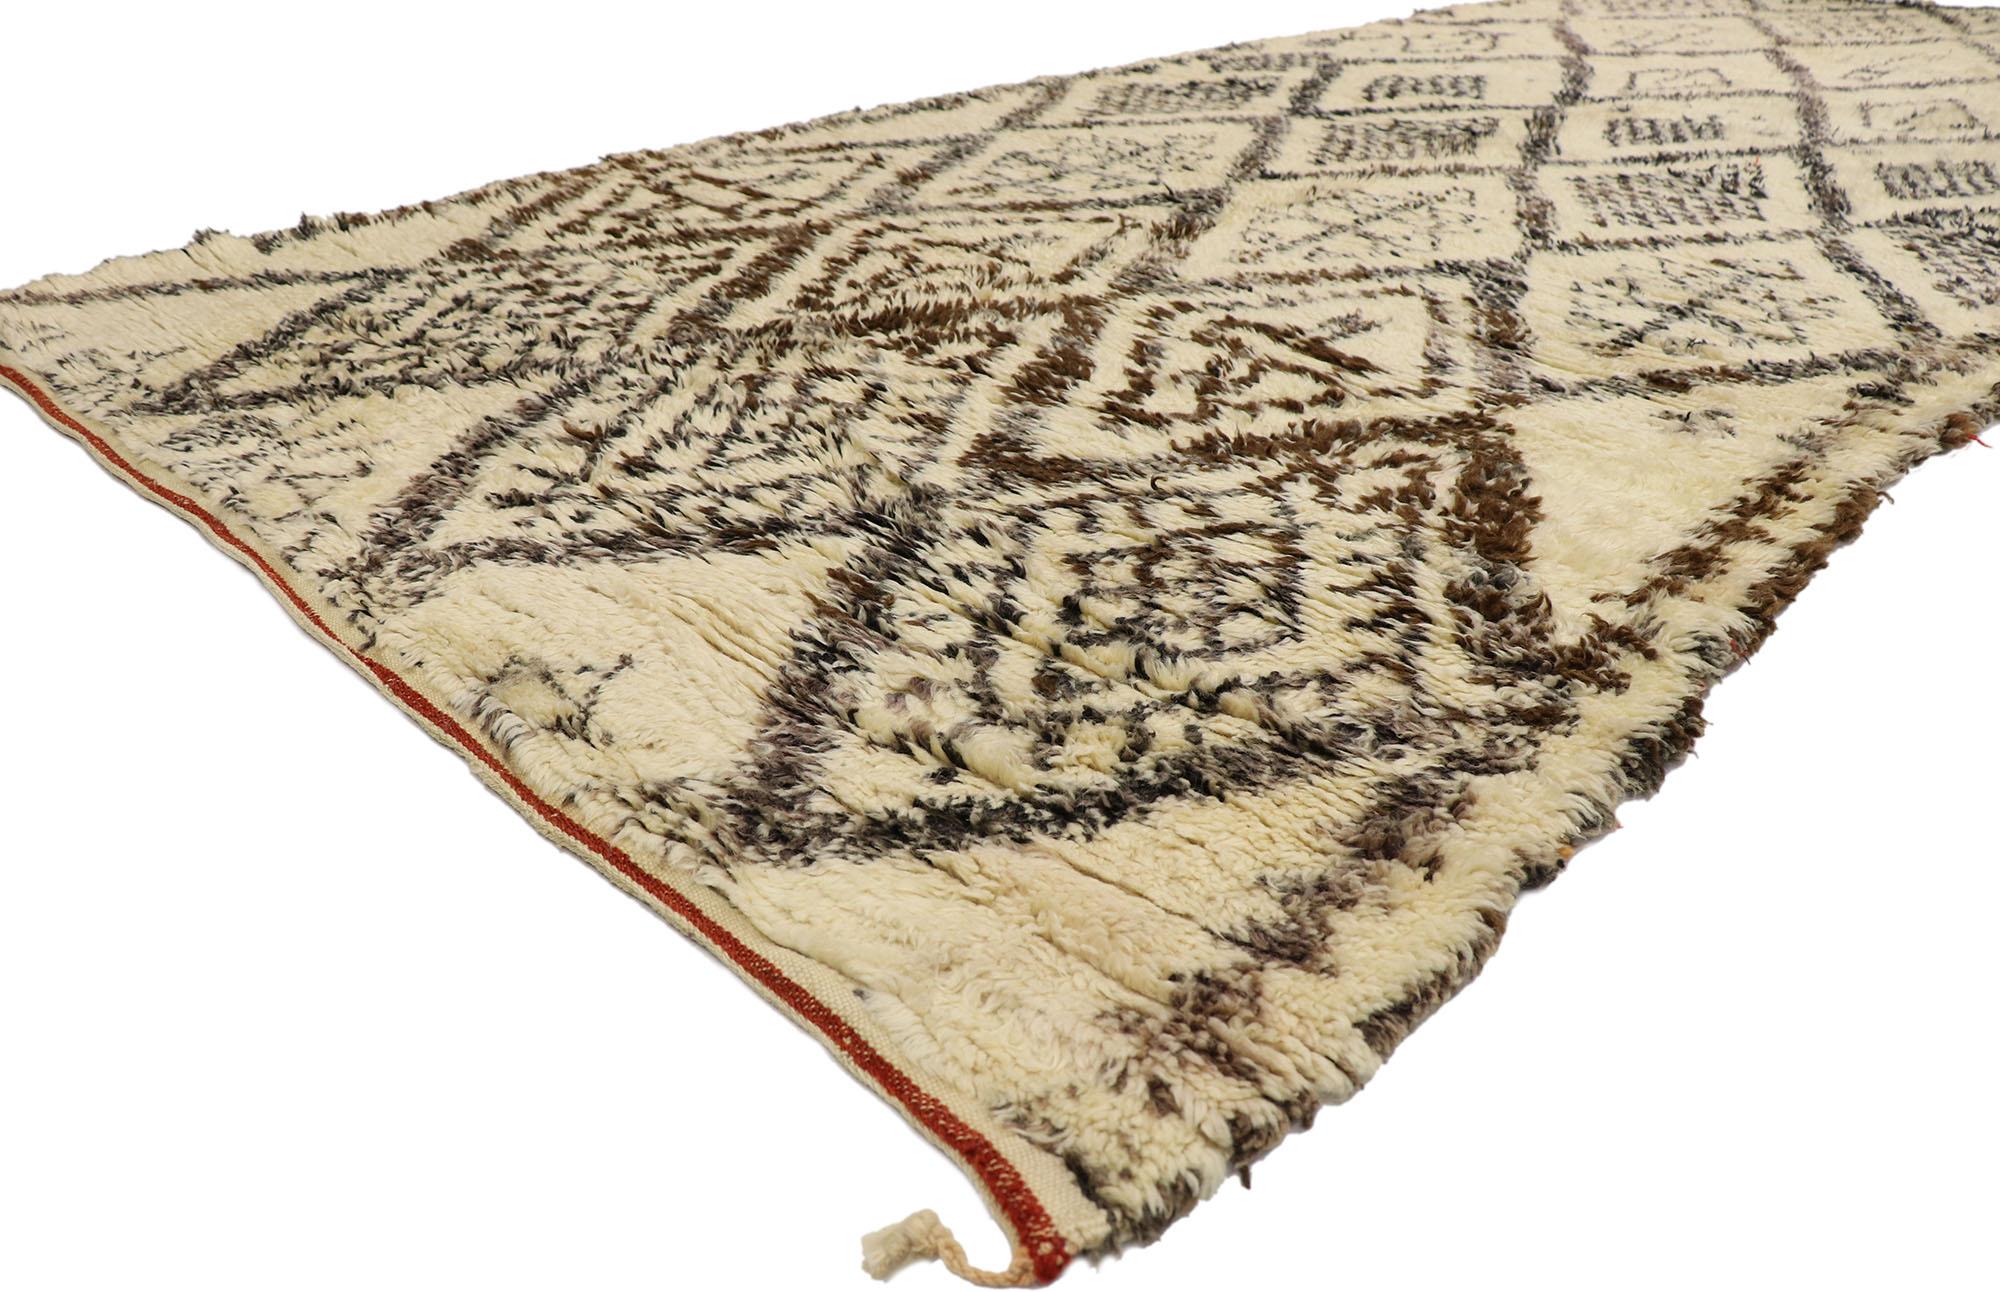 21406, vintage Berber Beni Ourain Moroccan rug with Tribal style. With its simplicity, plush pile and tribal style, this hand knotted wool vintage Berber Beni Ourain Moroccan rug is a captivating vision of woven beauty. It features a diamond lattice